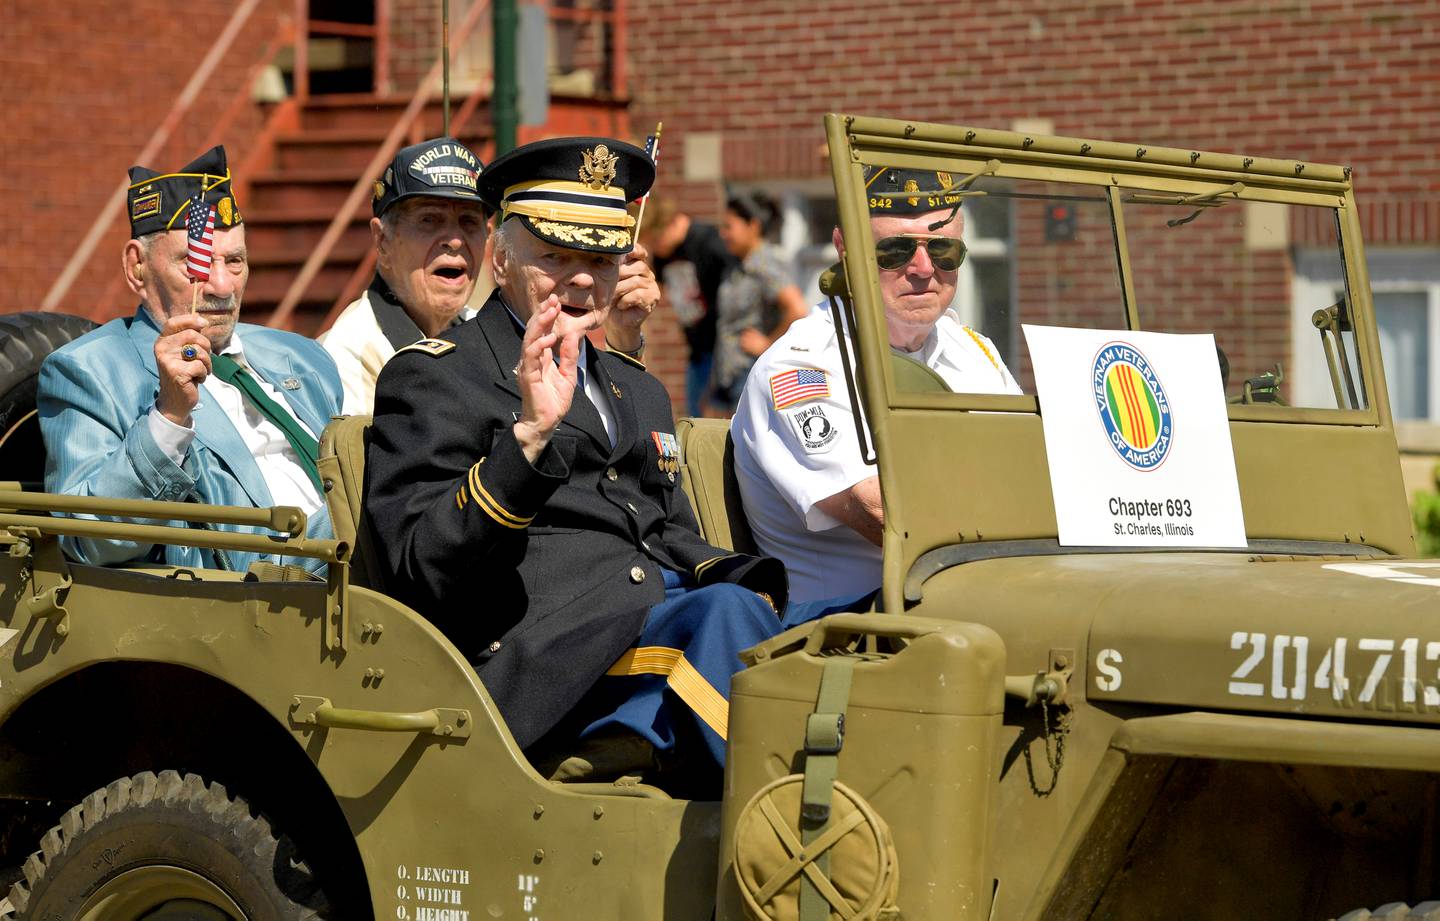 Veteran Robert Gorecki (center) particpates in the St. Charles Memorial Day Parade on Monday, May 29, 2023.